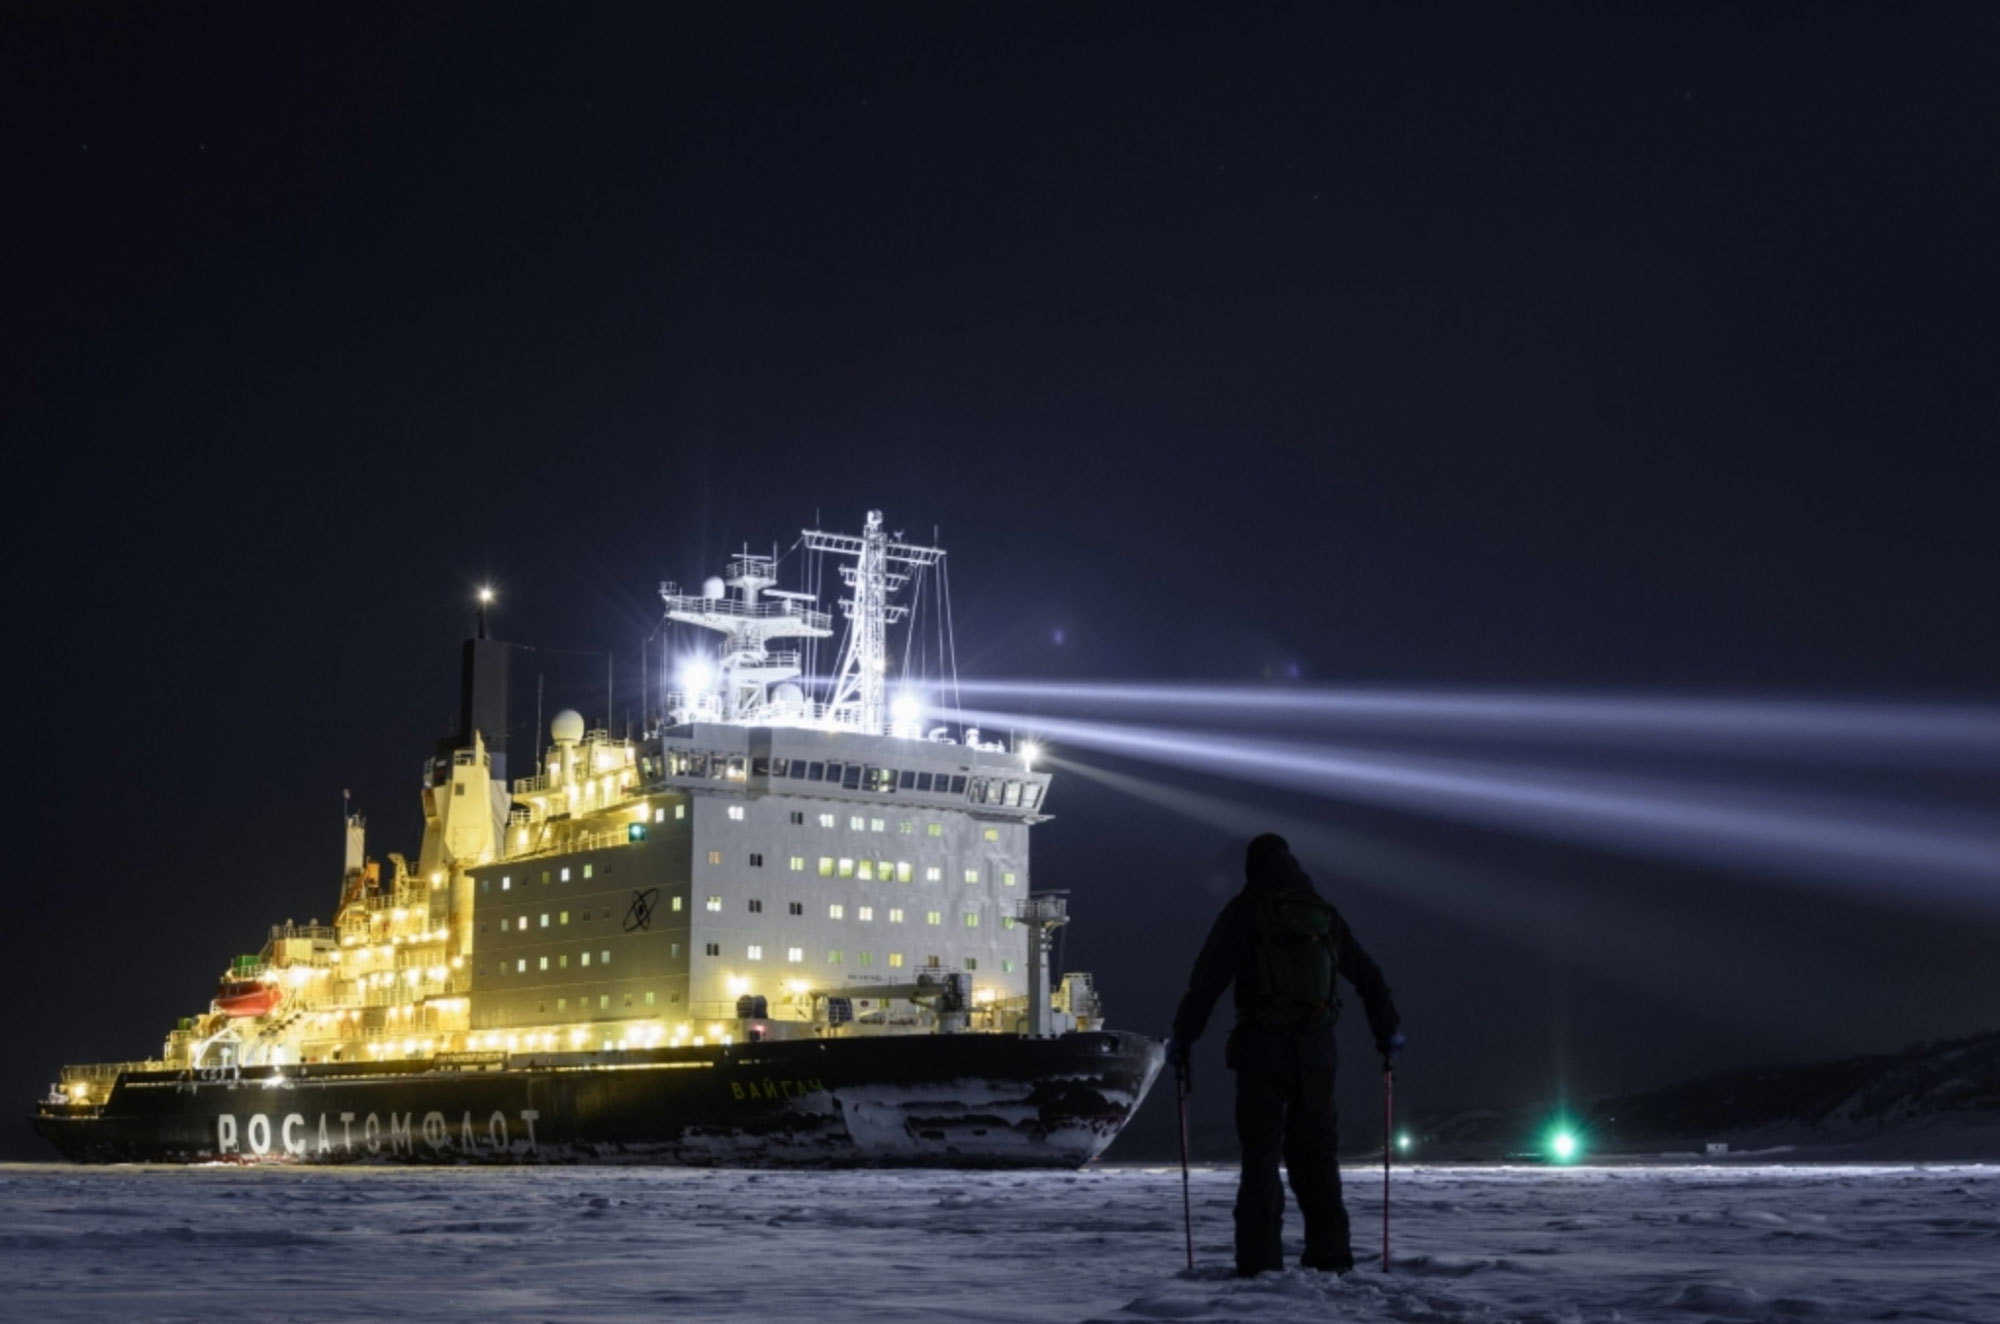 Climate change is making the Arctic more hospital, says Russian nuclear icebreaker captain - The Independent Barents Observer